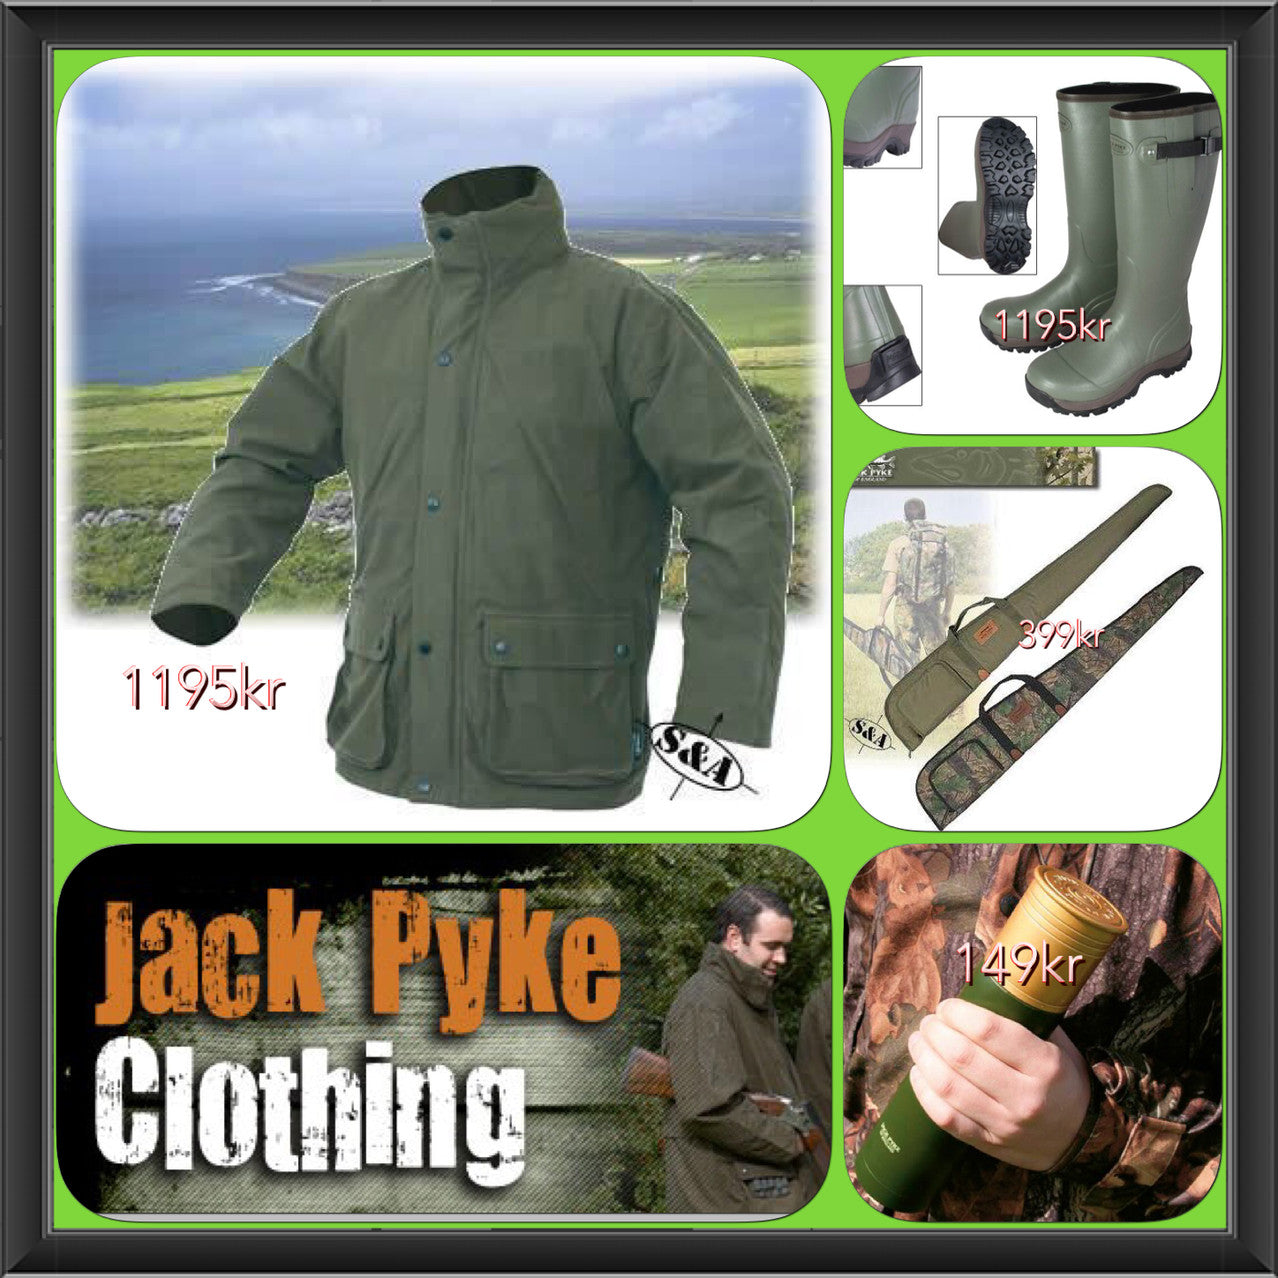 Our Jack Pyke products